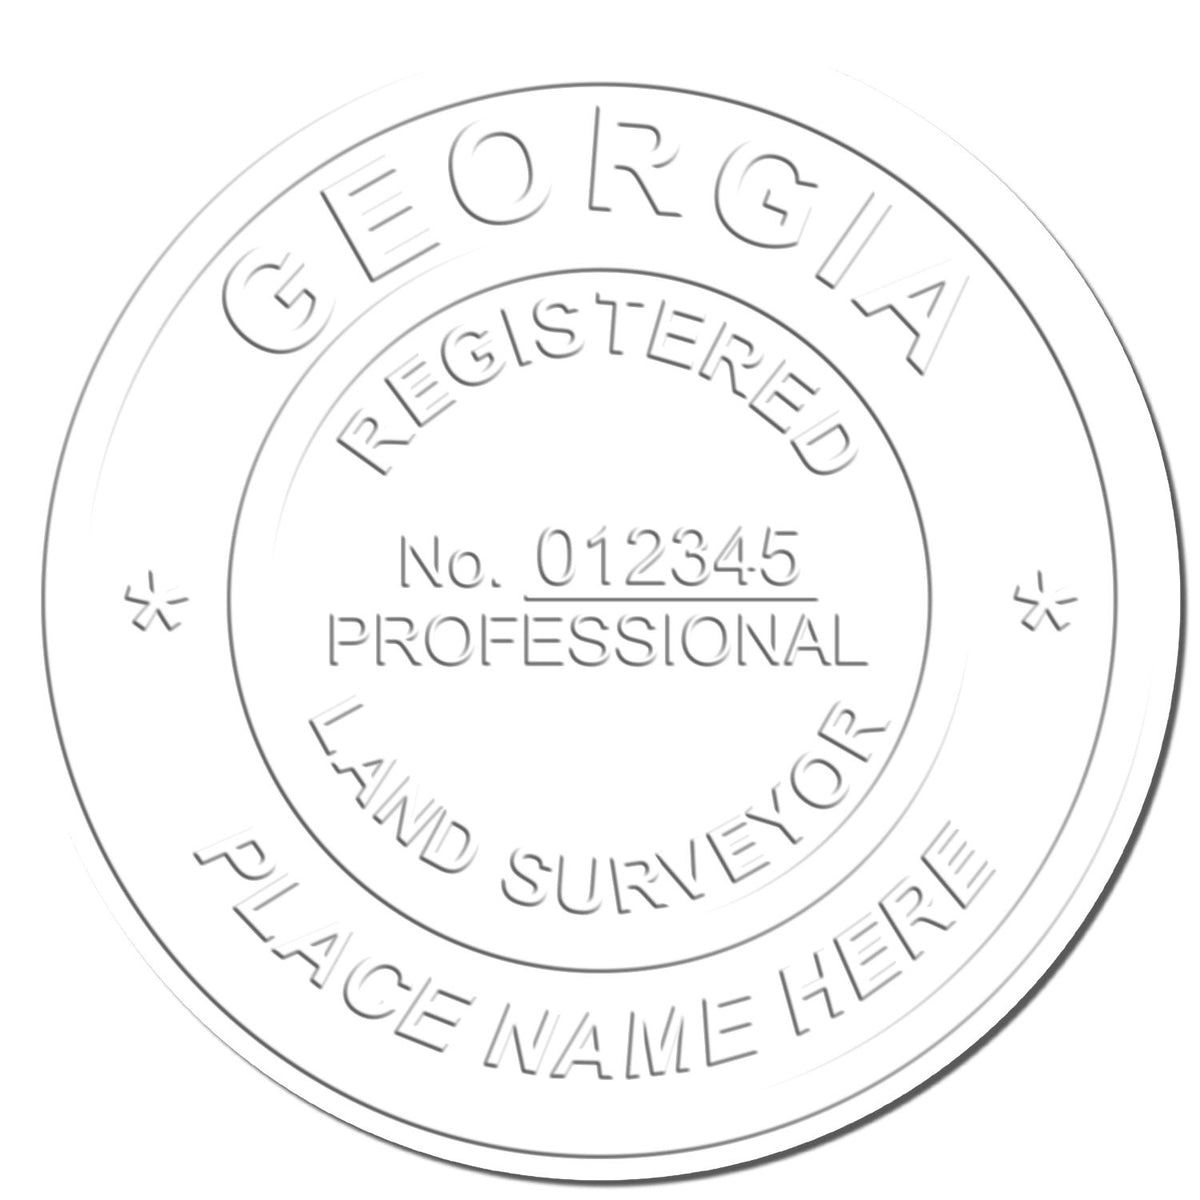 This paper is stamped with a sample imprint of the Gift Georgia Land Surveyor Seal, signifying its quality and reliability.